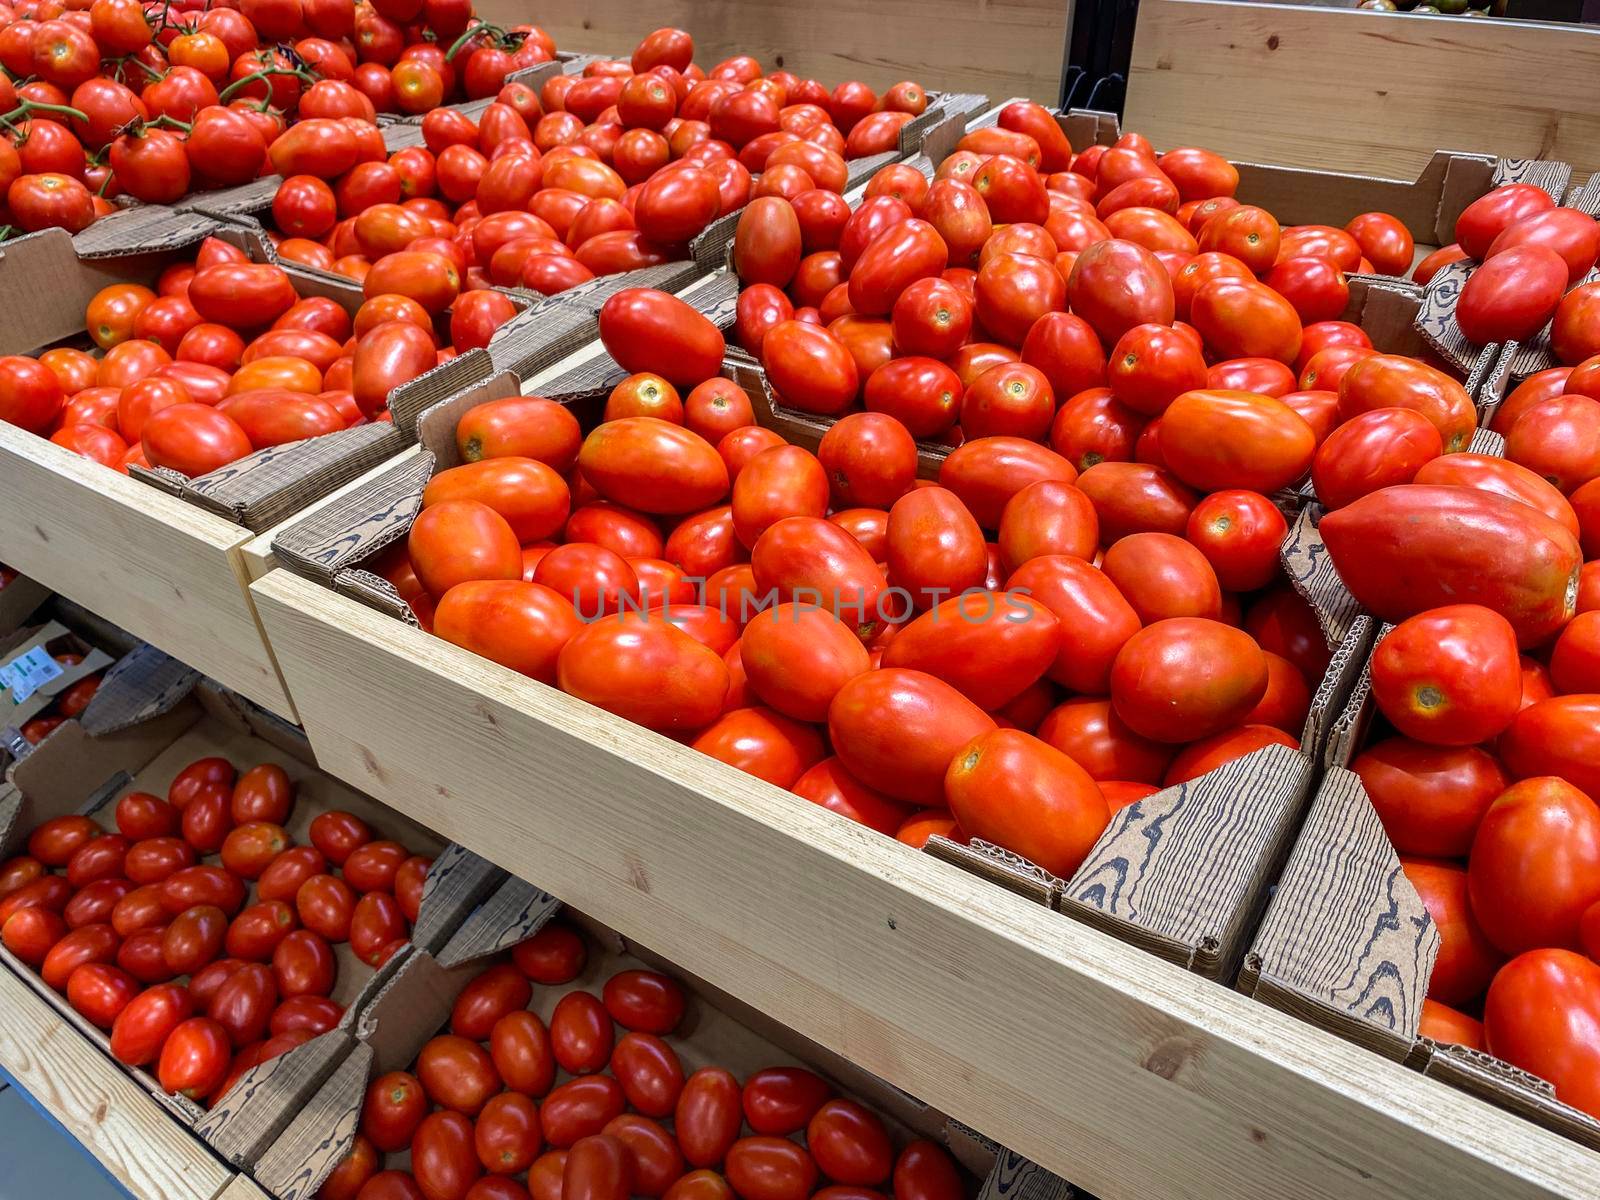 Fresh organic red pear tomatoes in a market or supermarket. Tomatoes in boxes in a food store